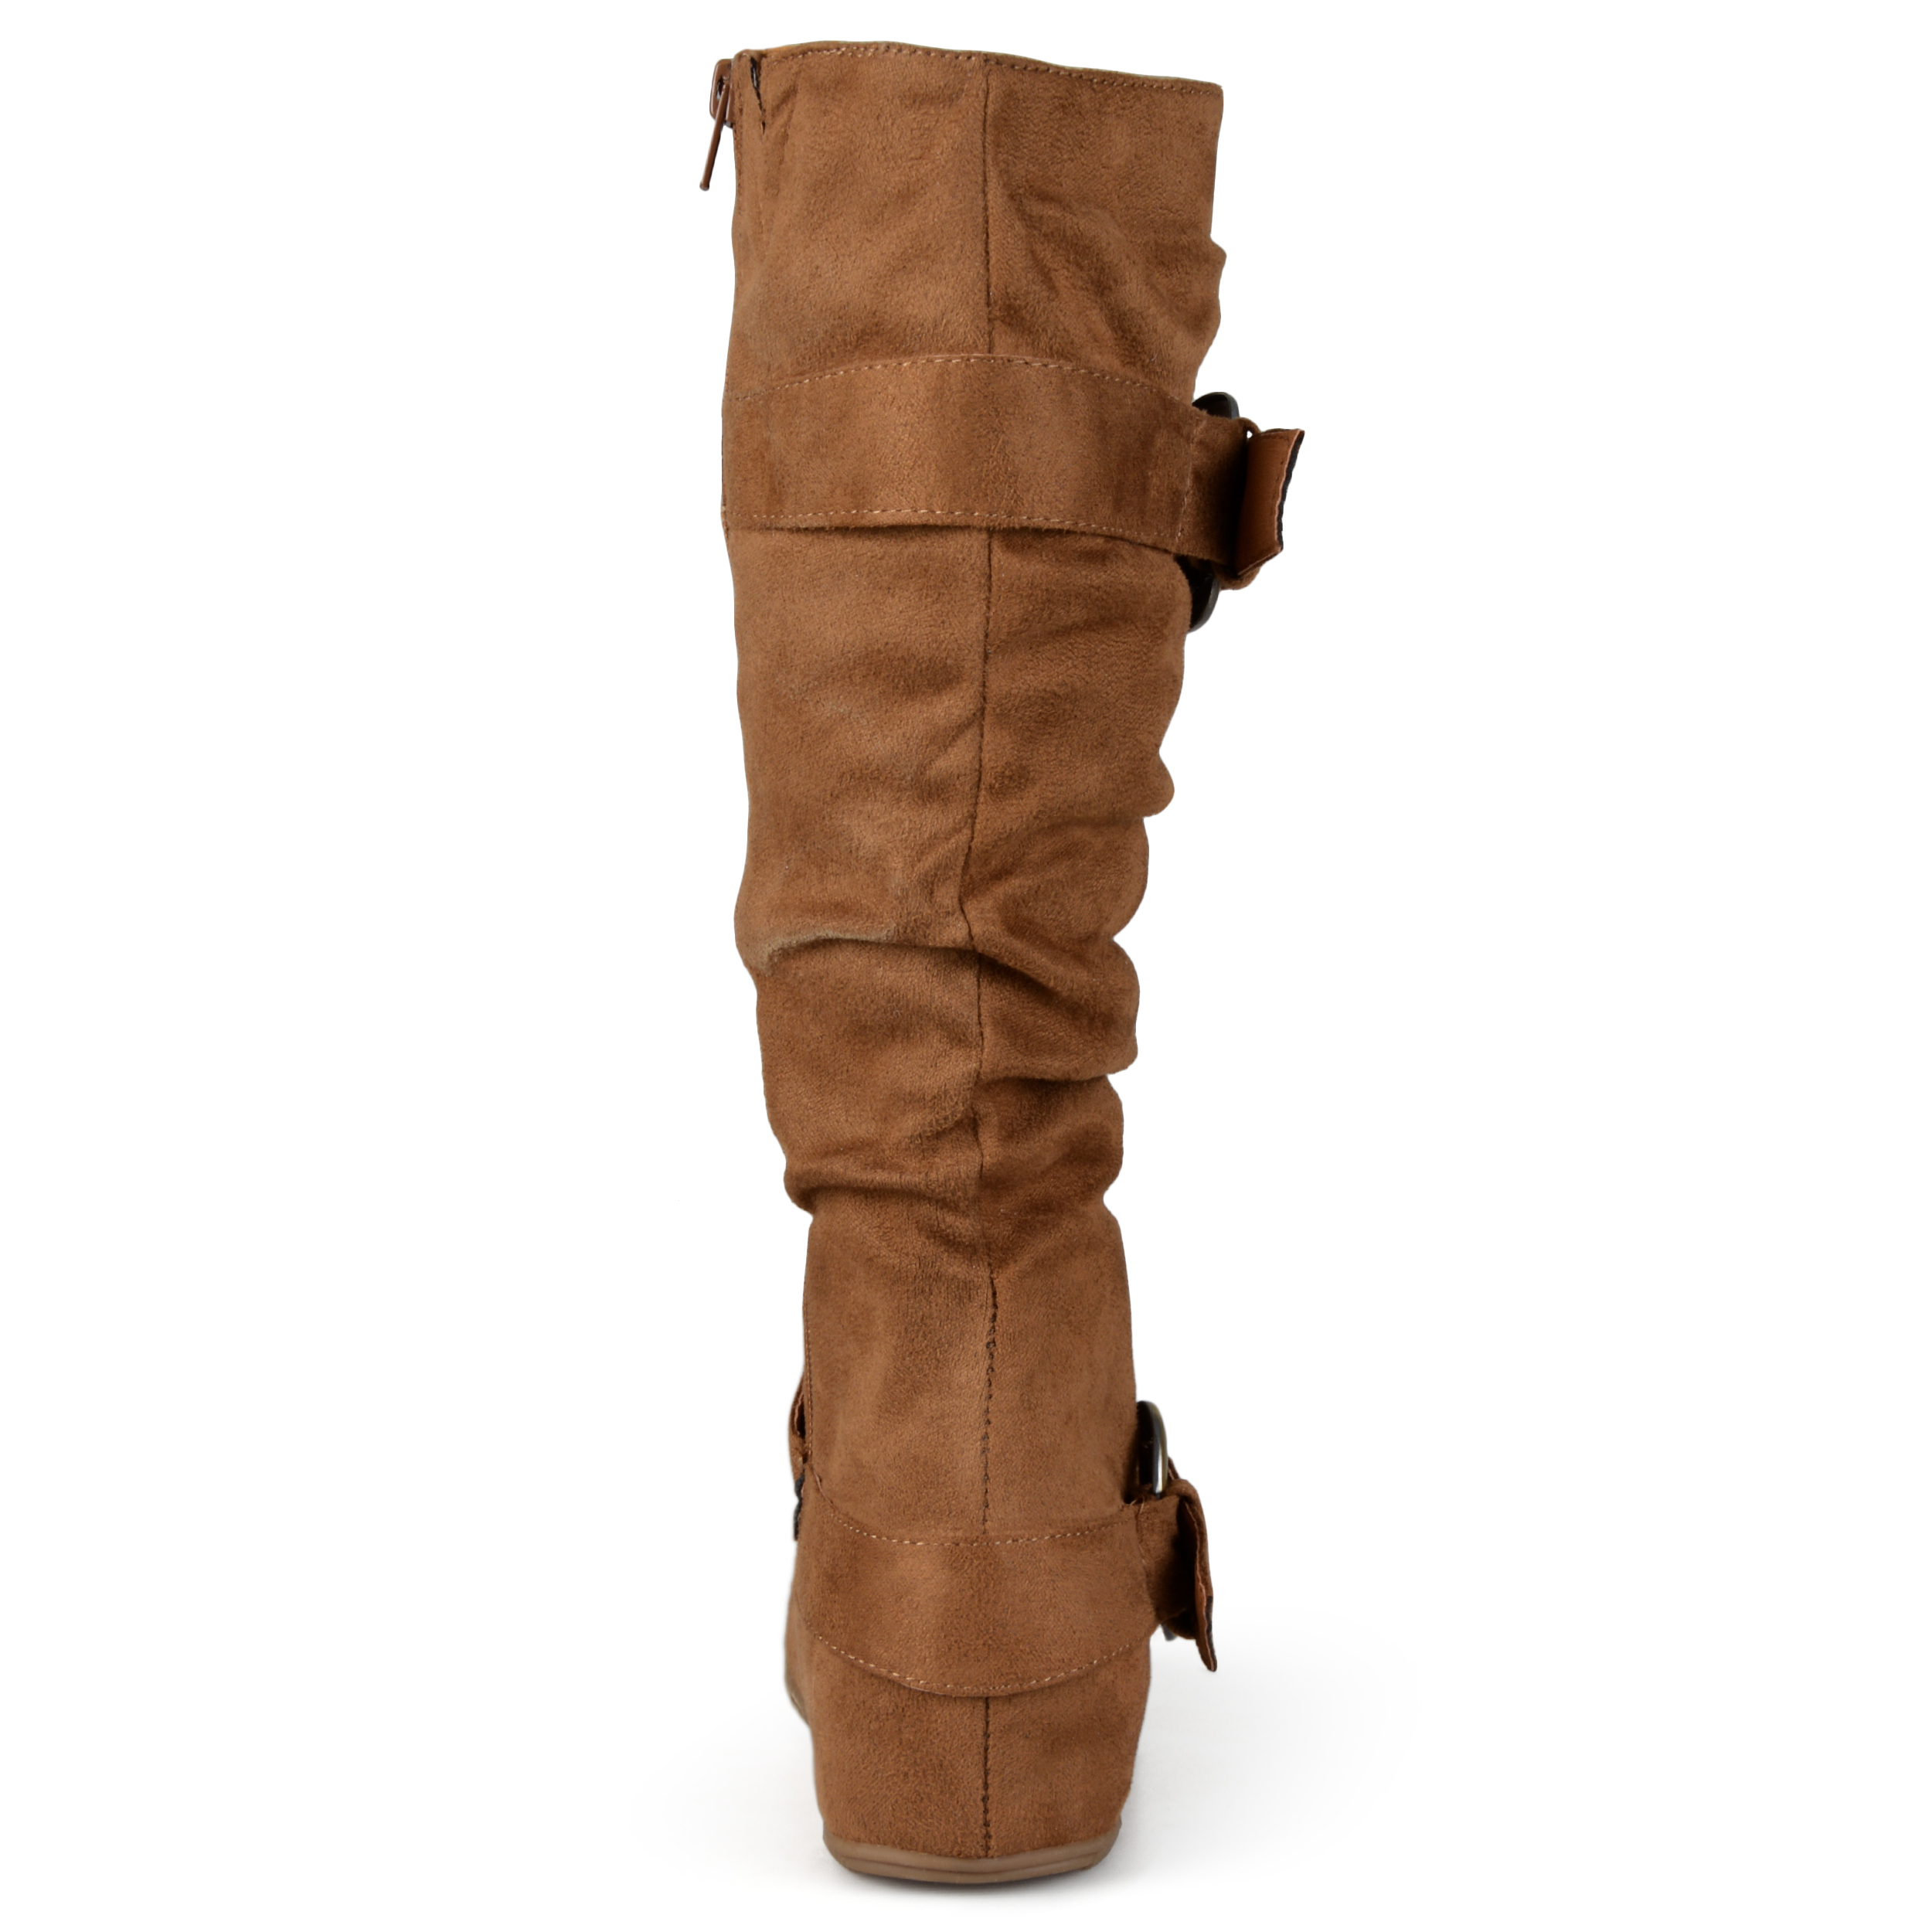 Women's Wide-Calf Buckle Knee-High Slouch Microsuede Boot - image 4 of 8